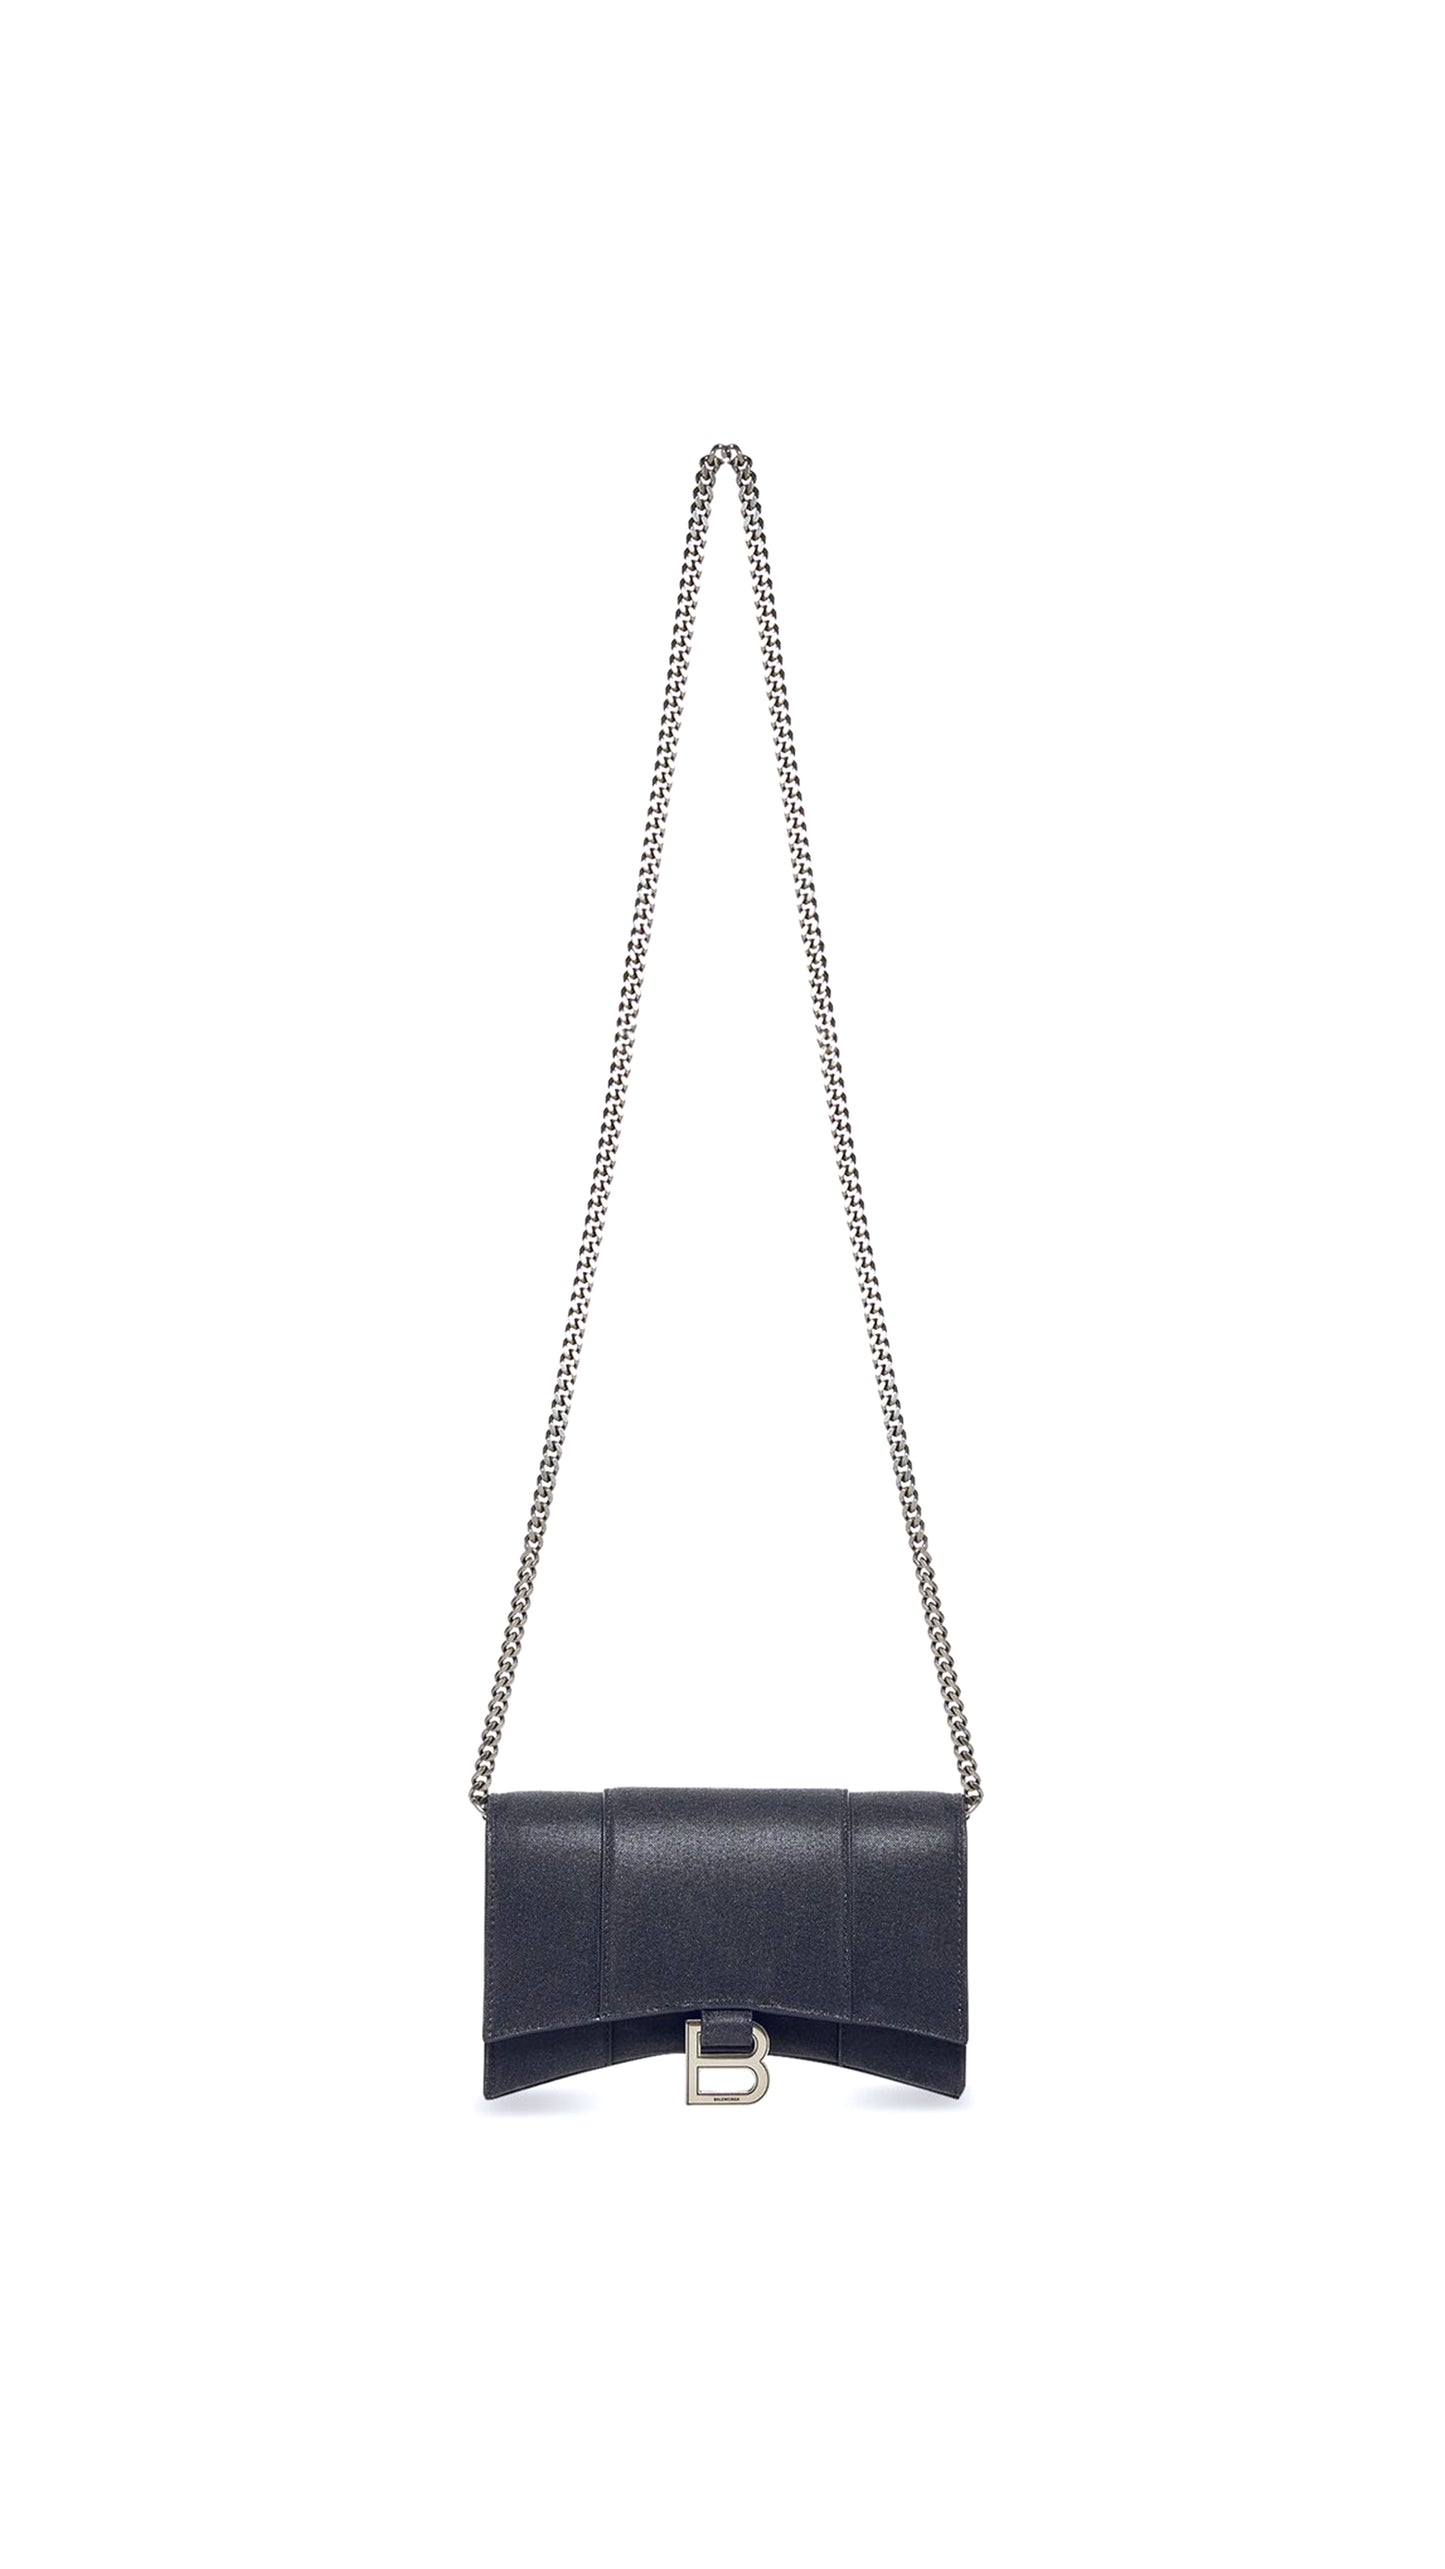 Hourglass Wallet With Chain In Glitter Material - Black